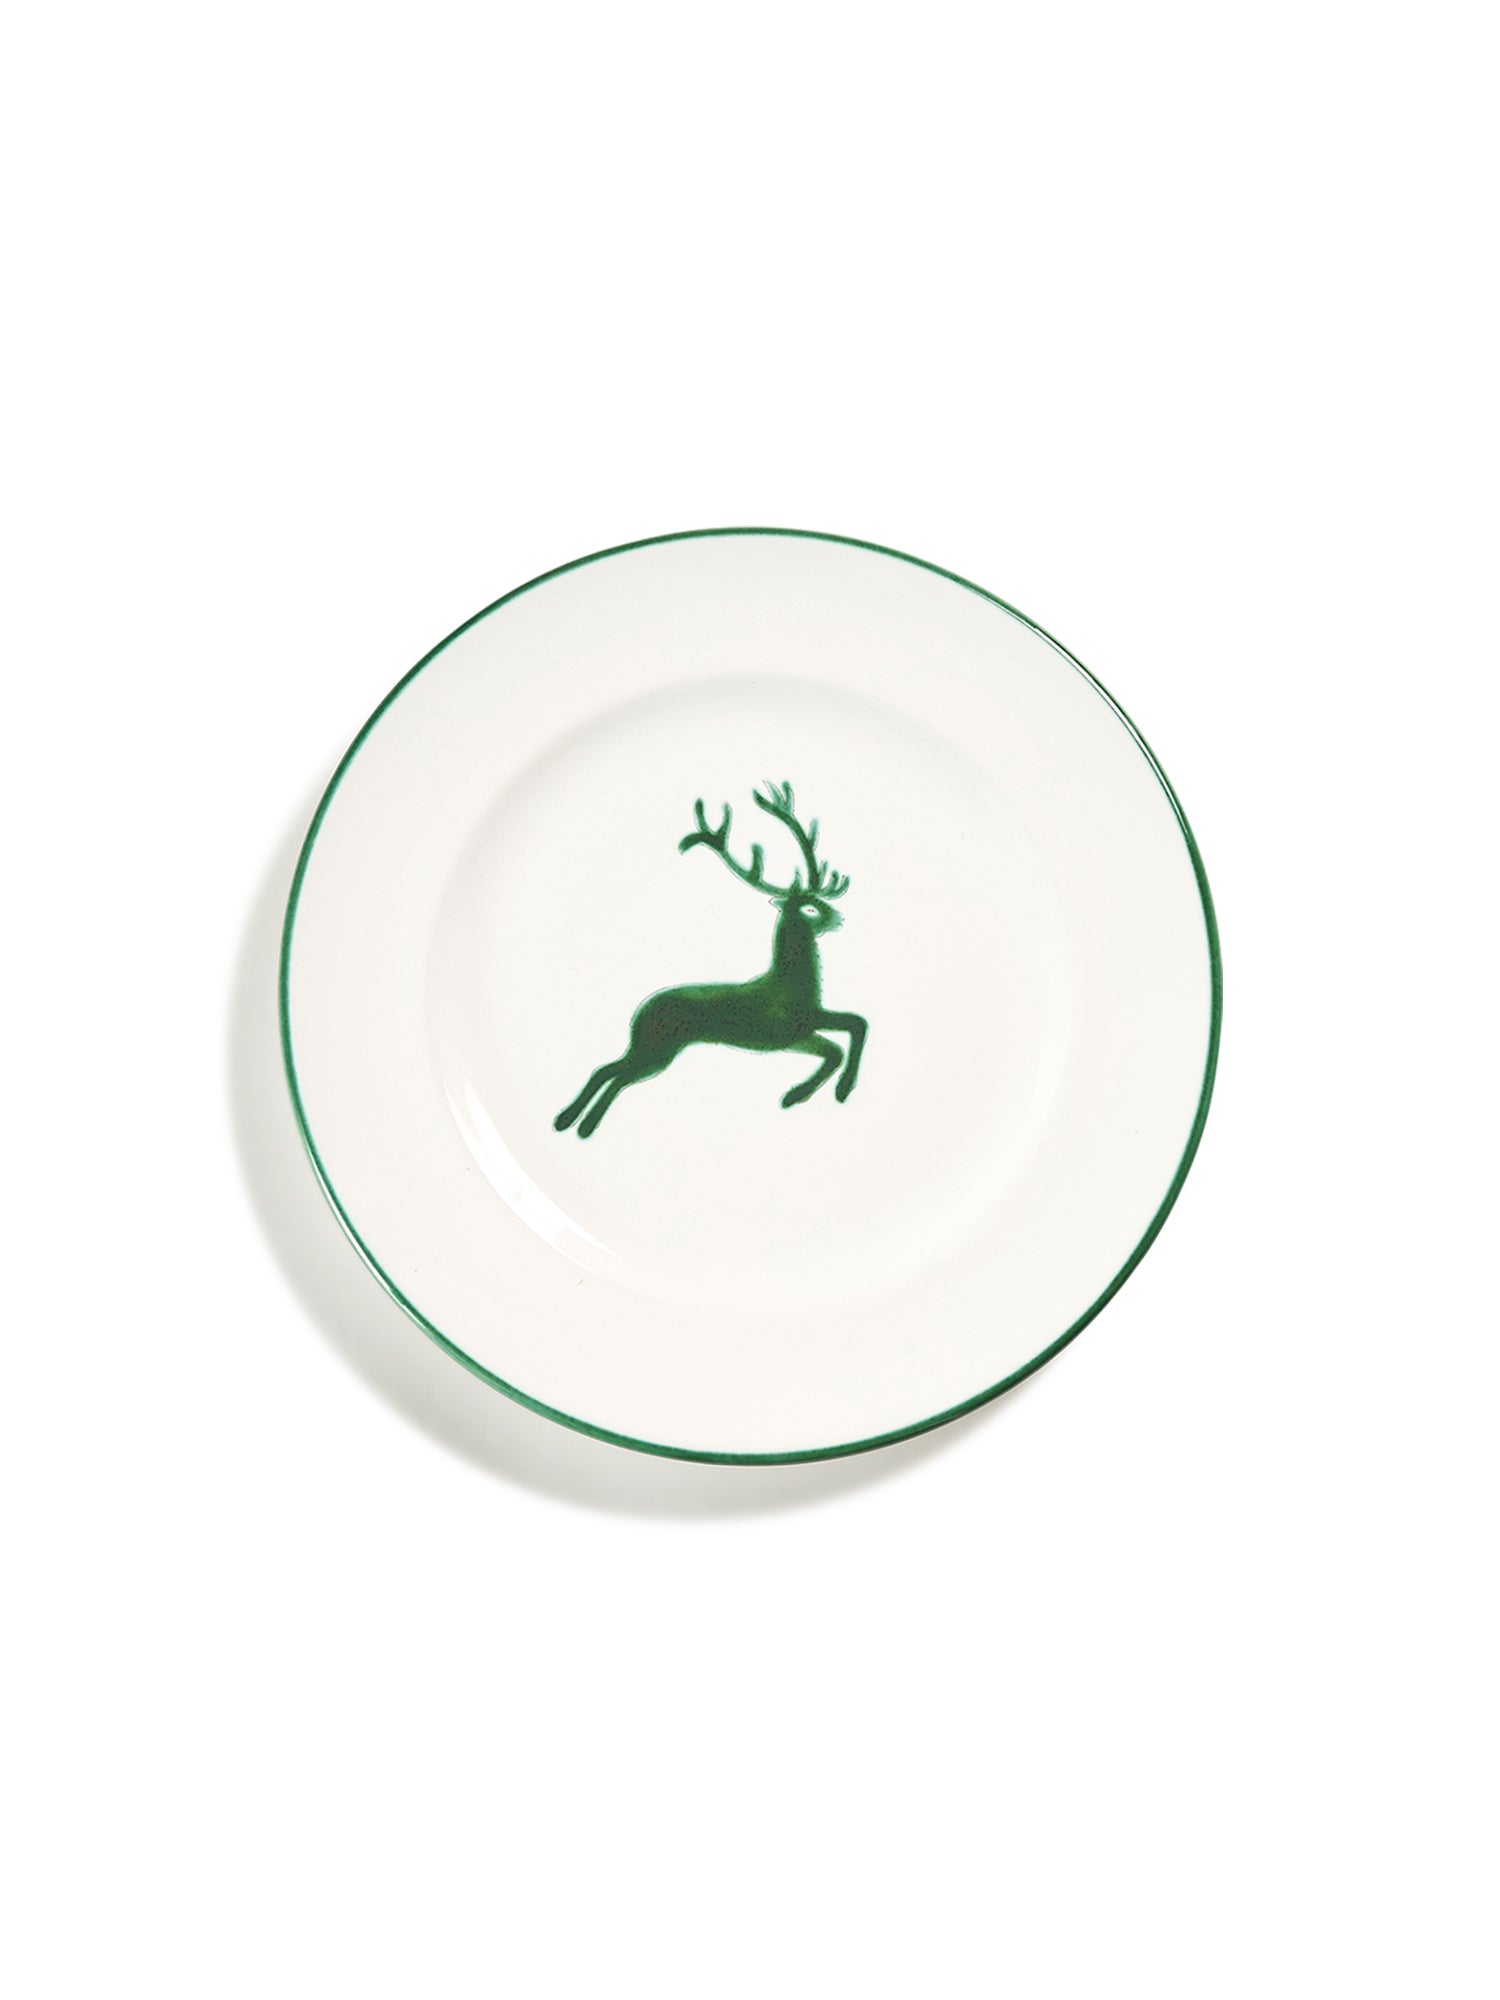 STAG GREEN